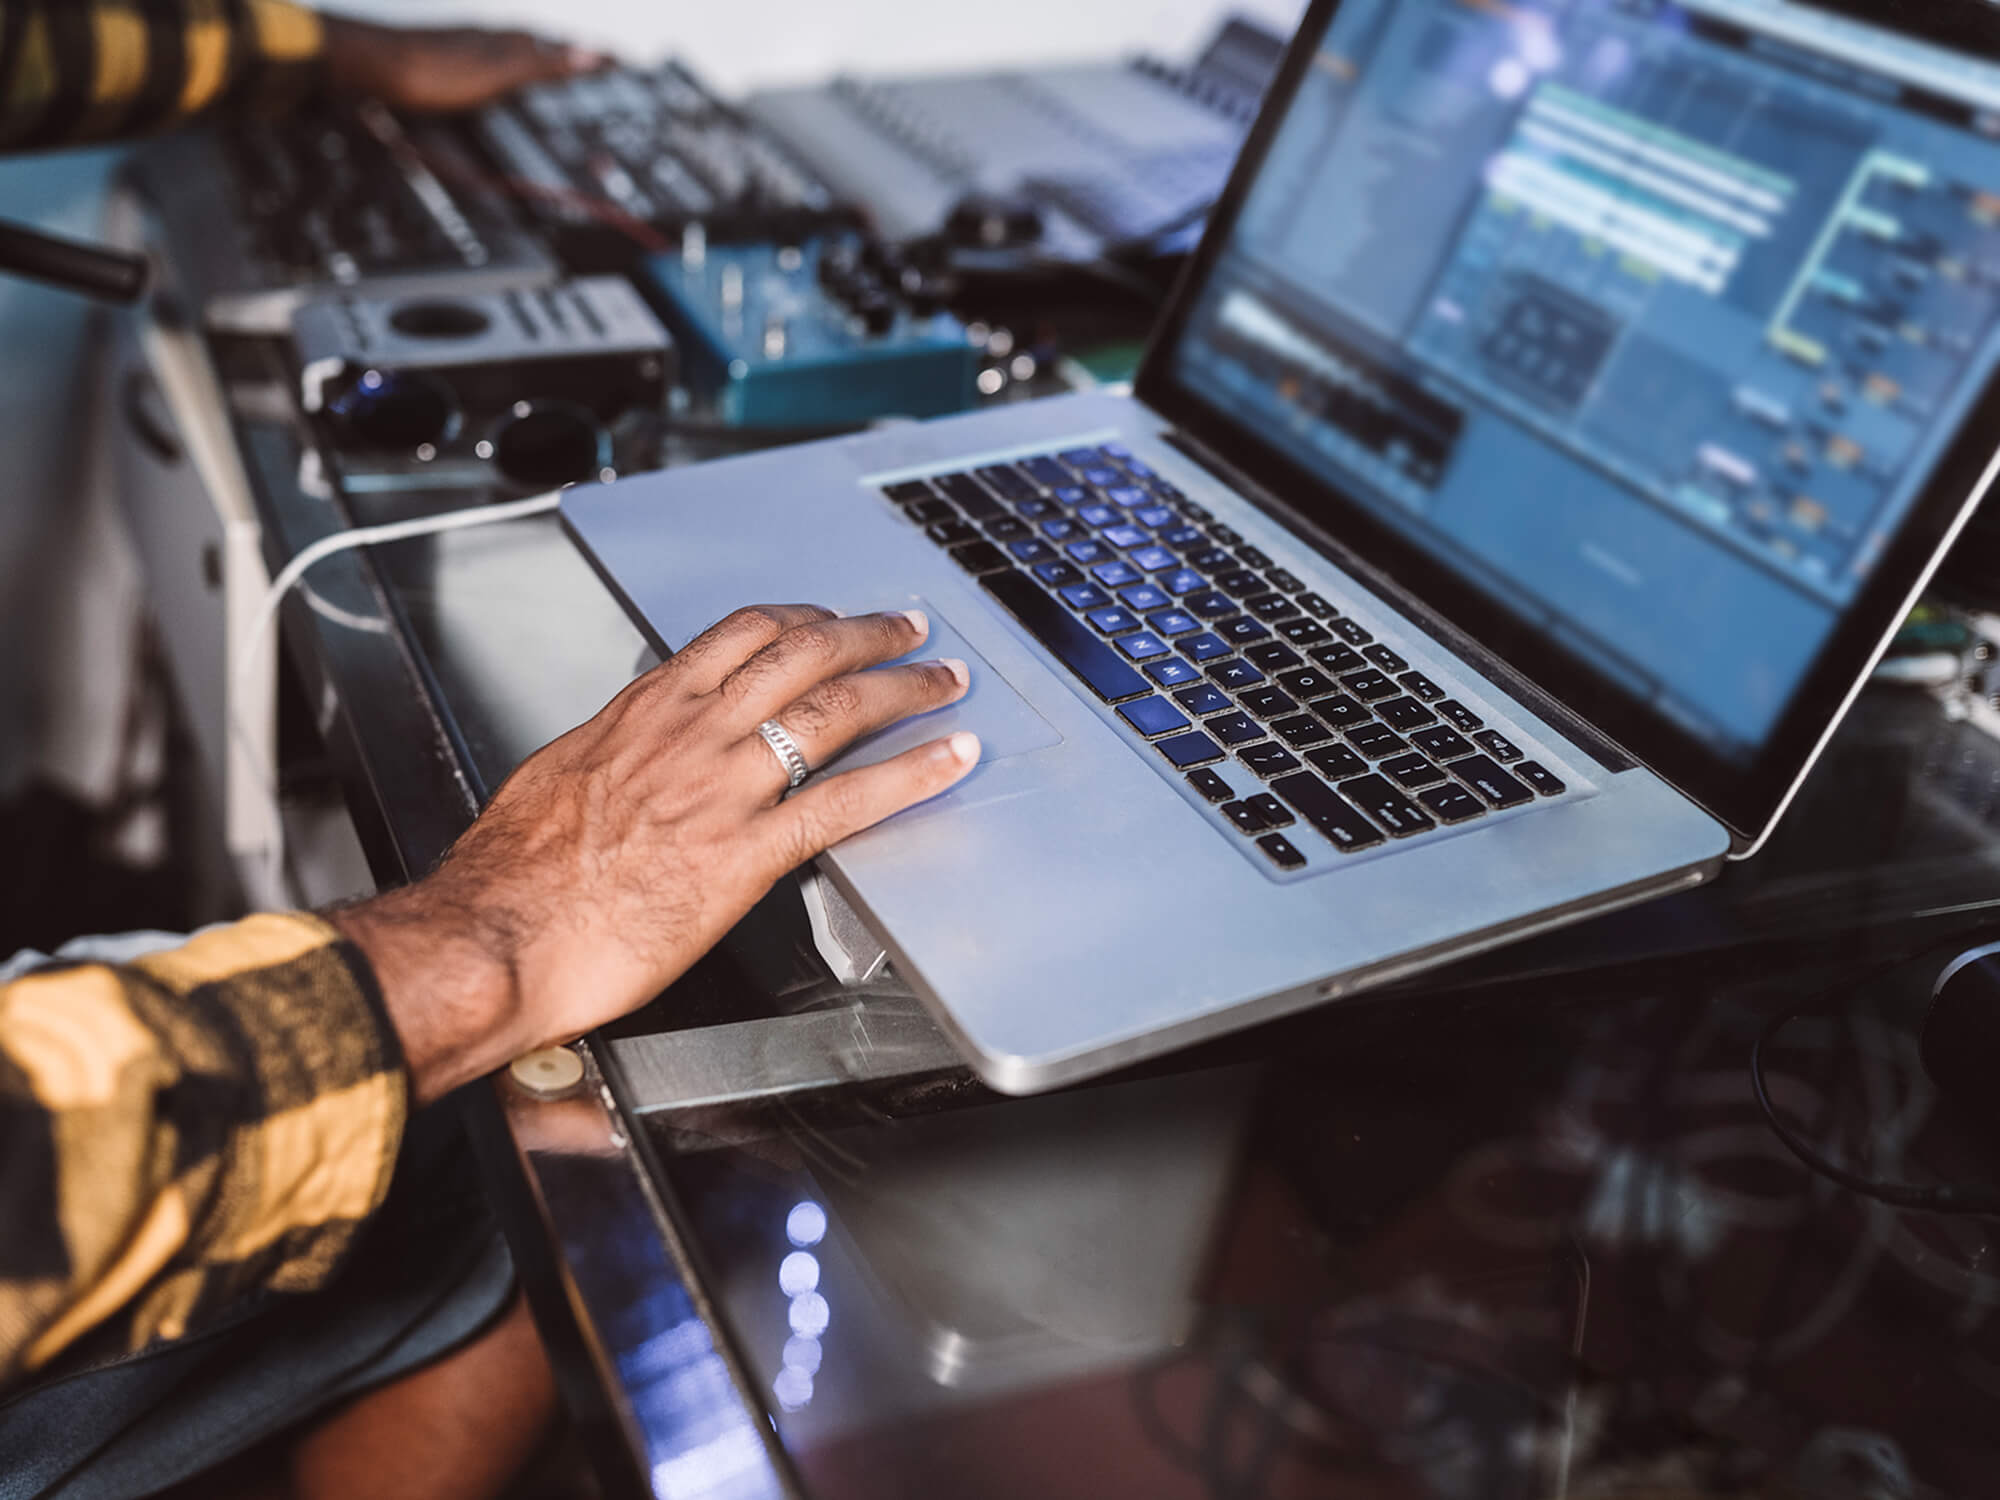 Musician with a DAW open on their laptop, photo by Jose Carlos Cerdeno Martinez/Getty Images